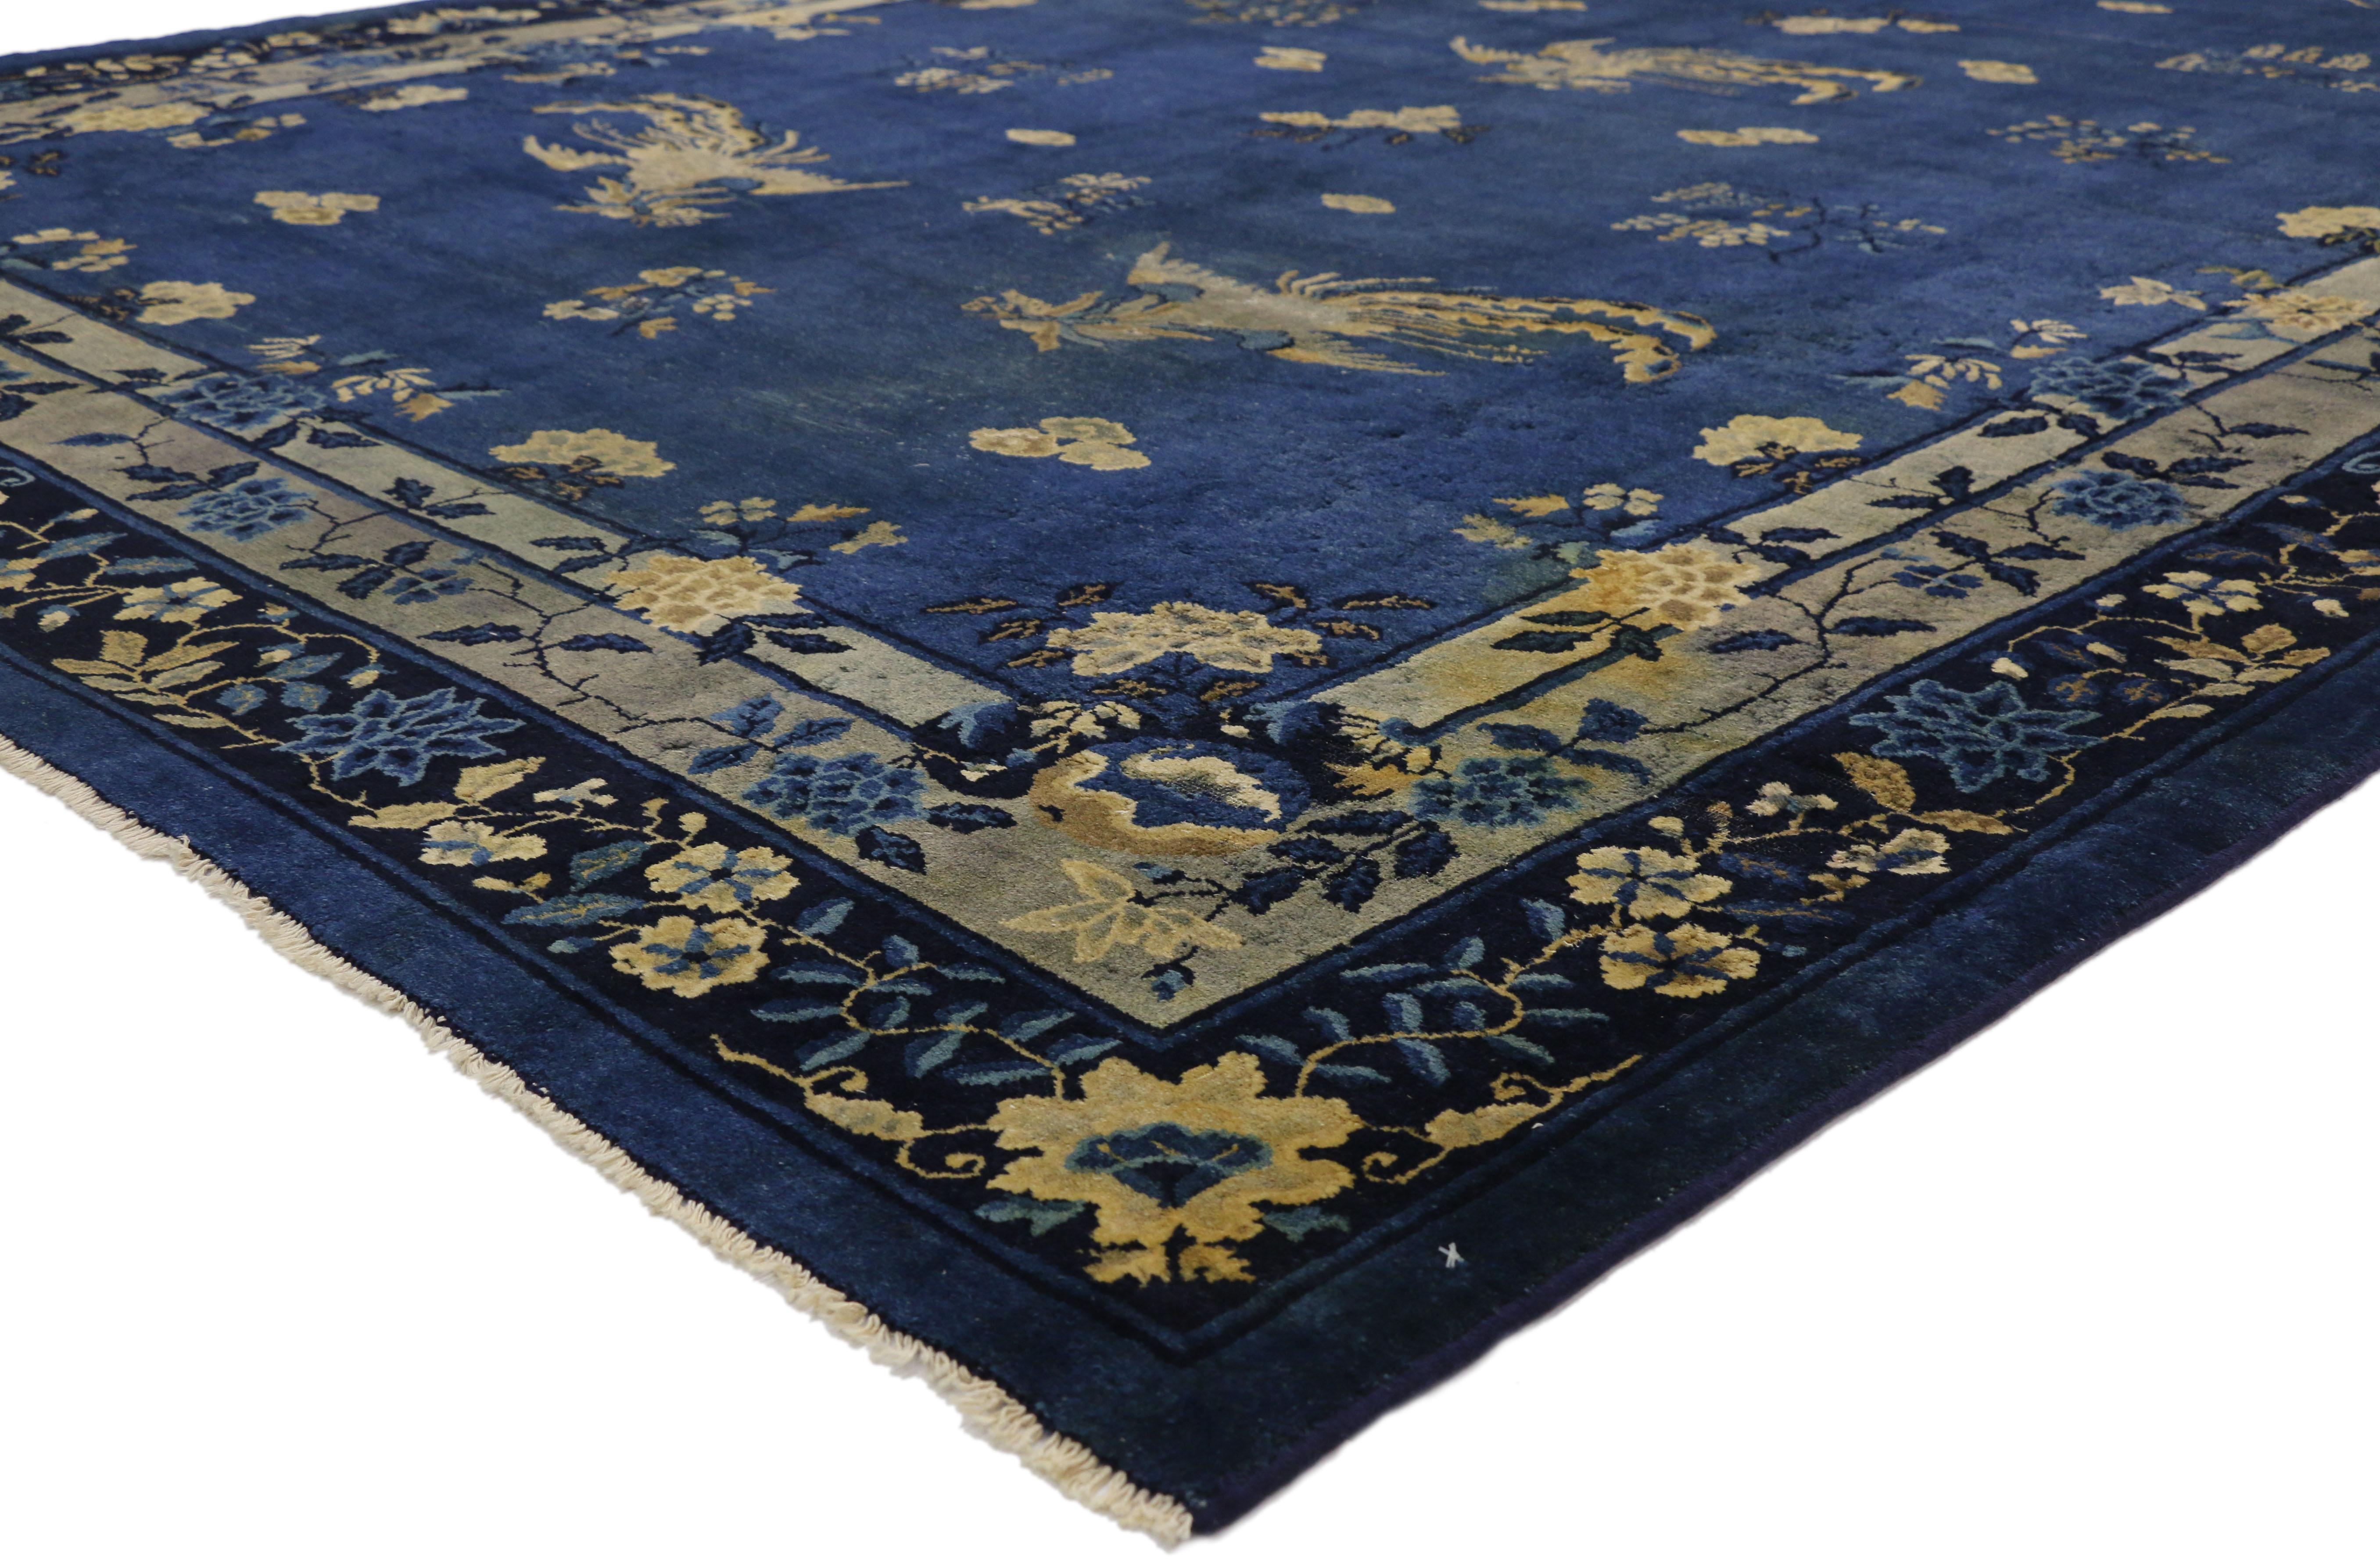 77266 distressed Antique Chinese Peking rug with Traditional Chinoiserie style. This distressed hand knotted wool antique Chinese Peking rug features a variety of phoenix and floral motifs spread across an abrashed blue field. Five large phoenixes,